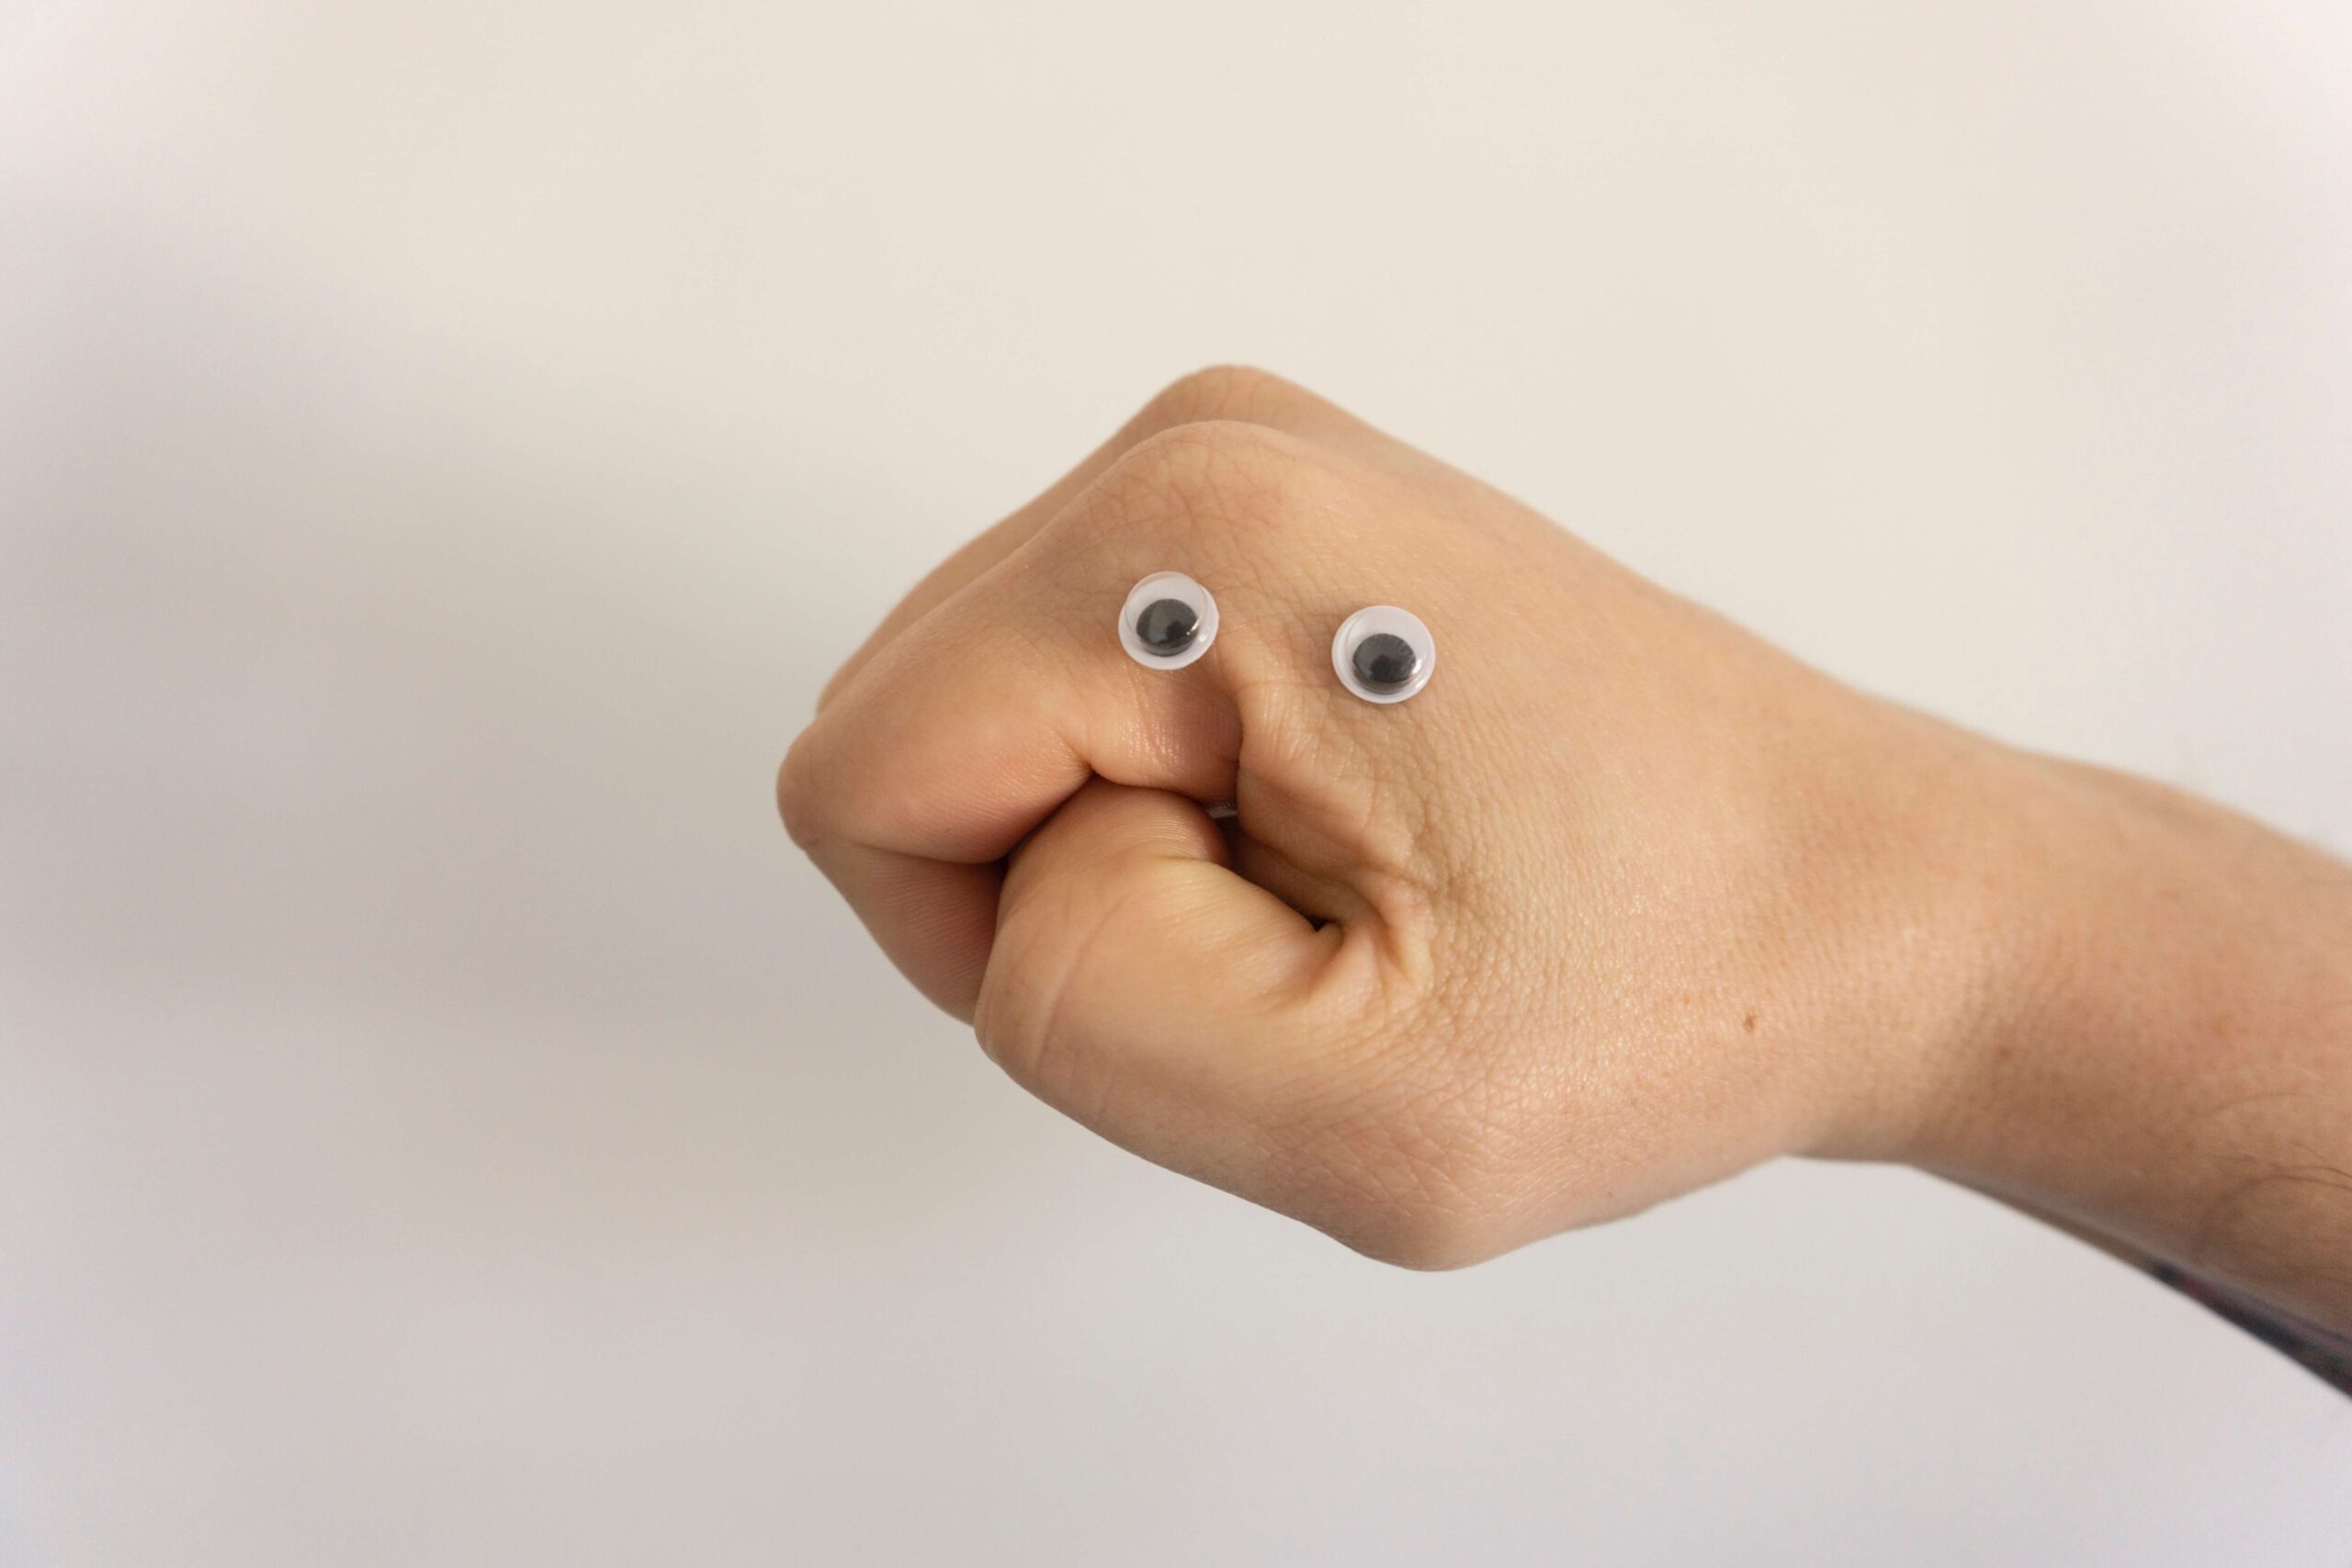 A hand in the shape of a fist. Two plastic googly eyes have been stuck on the side of the knuckled so that the fist resembled a face.